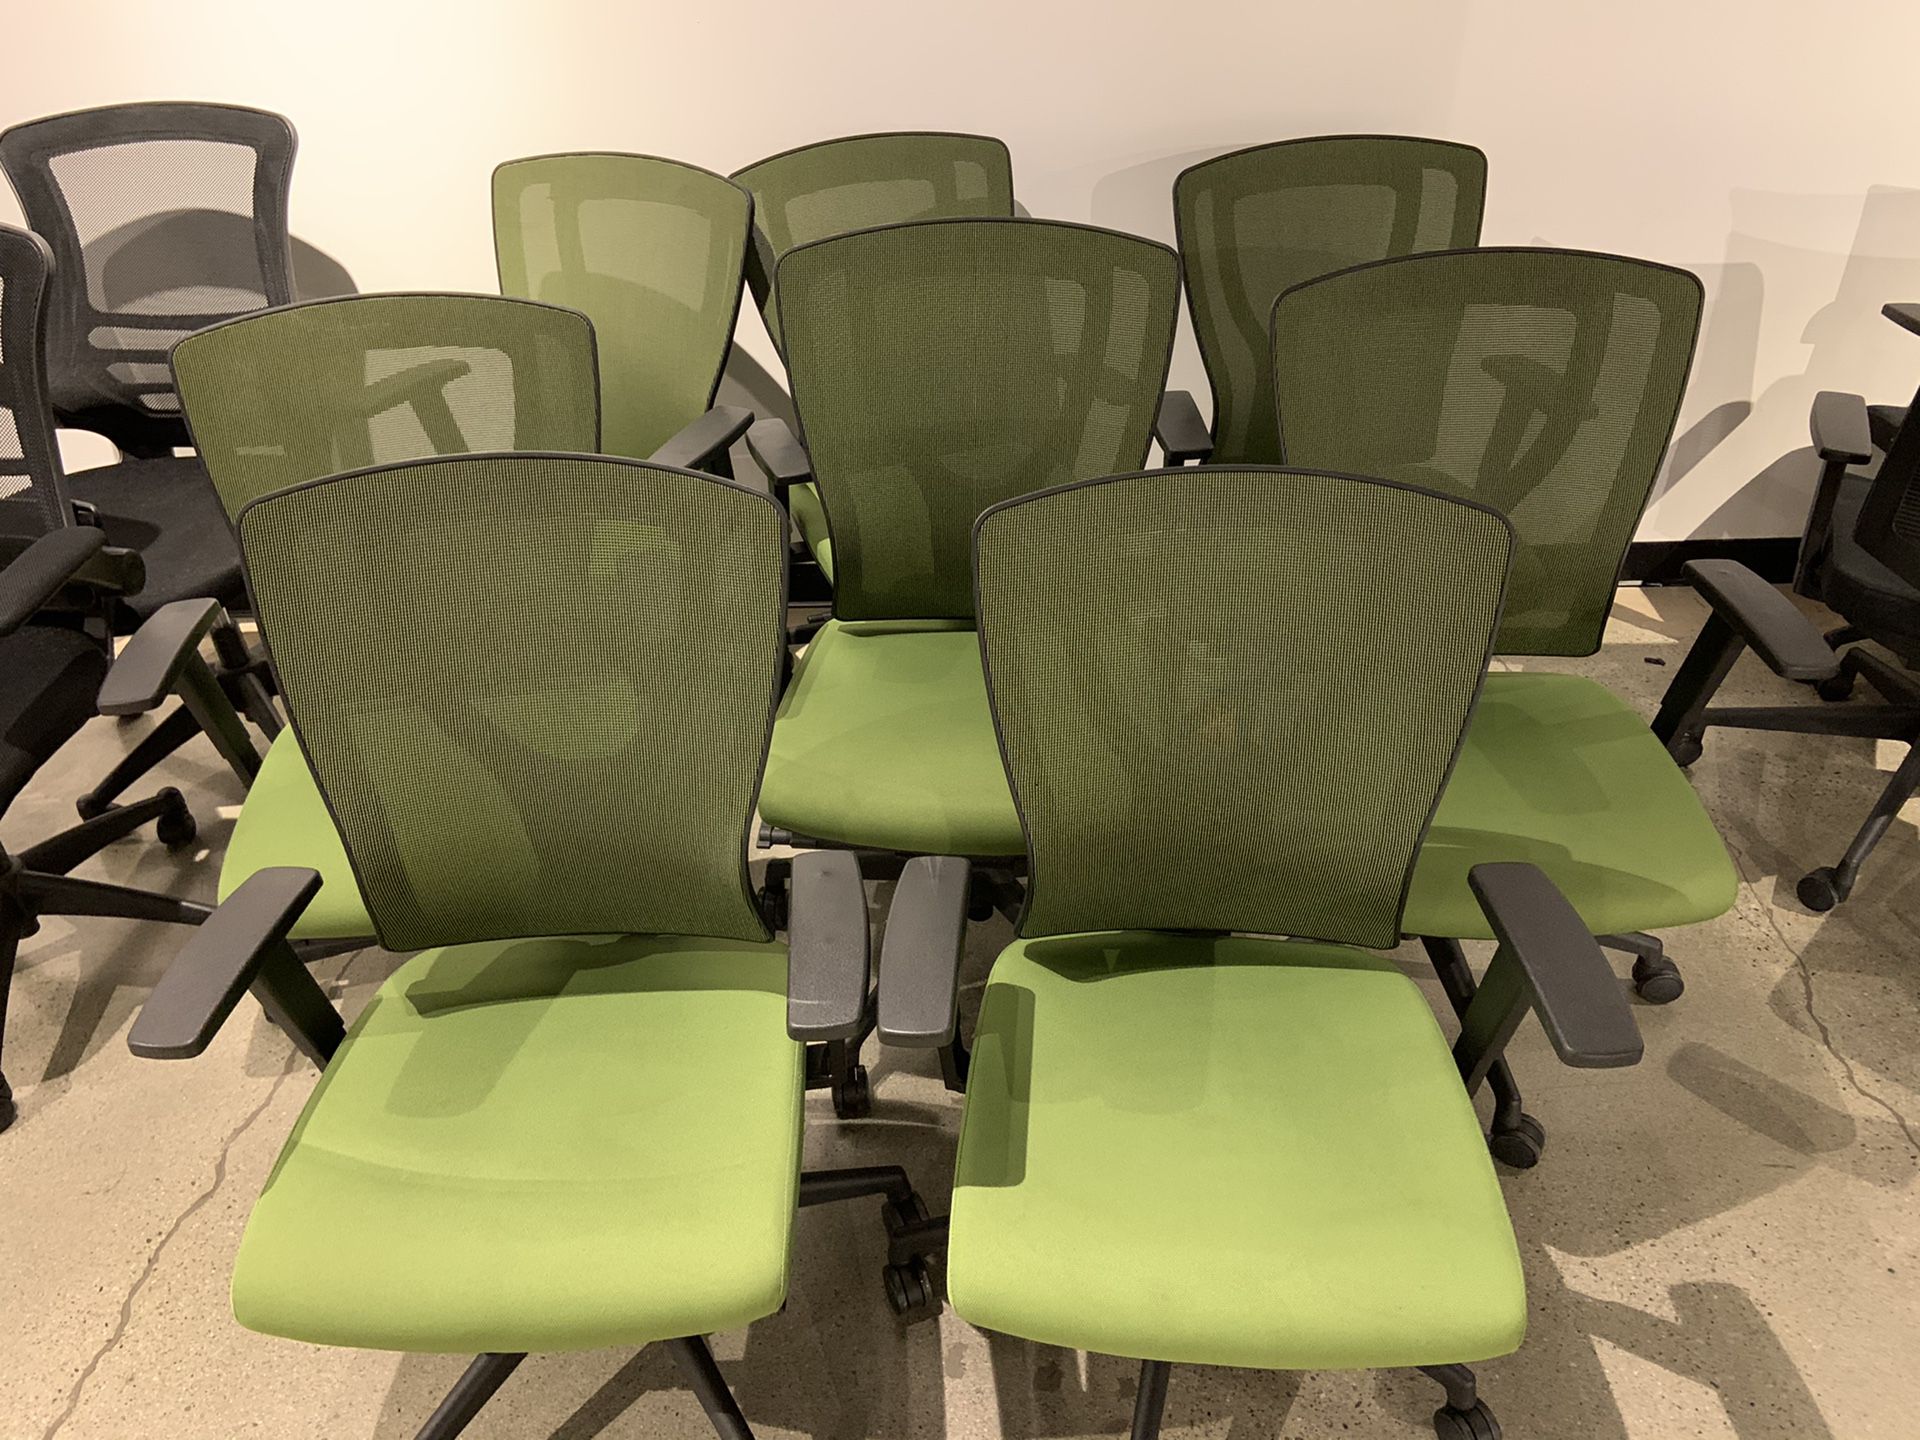 X8 Office Chairs. Adjustable Heights and Armrest. Comfy and rolls on wheels